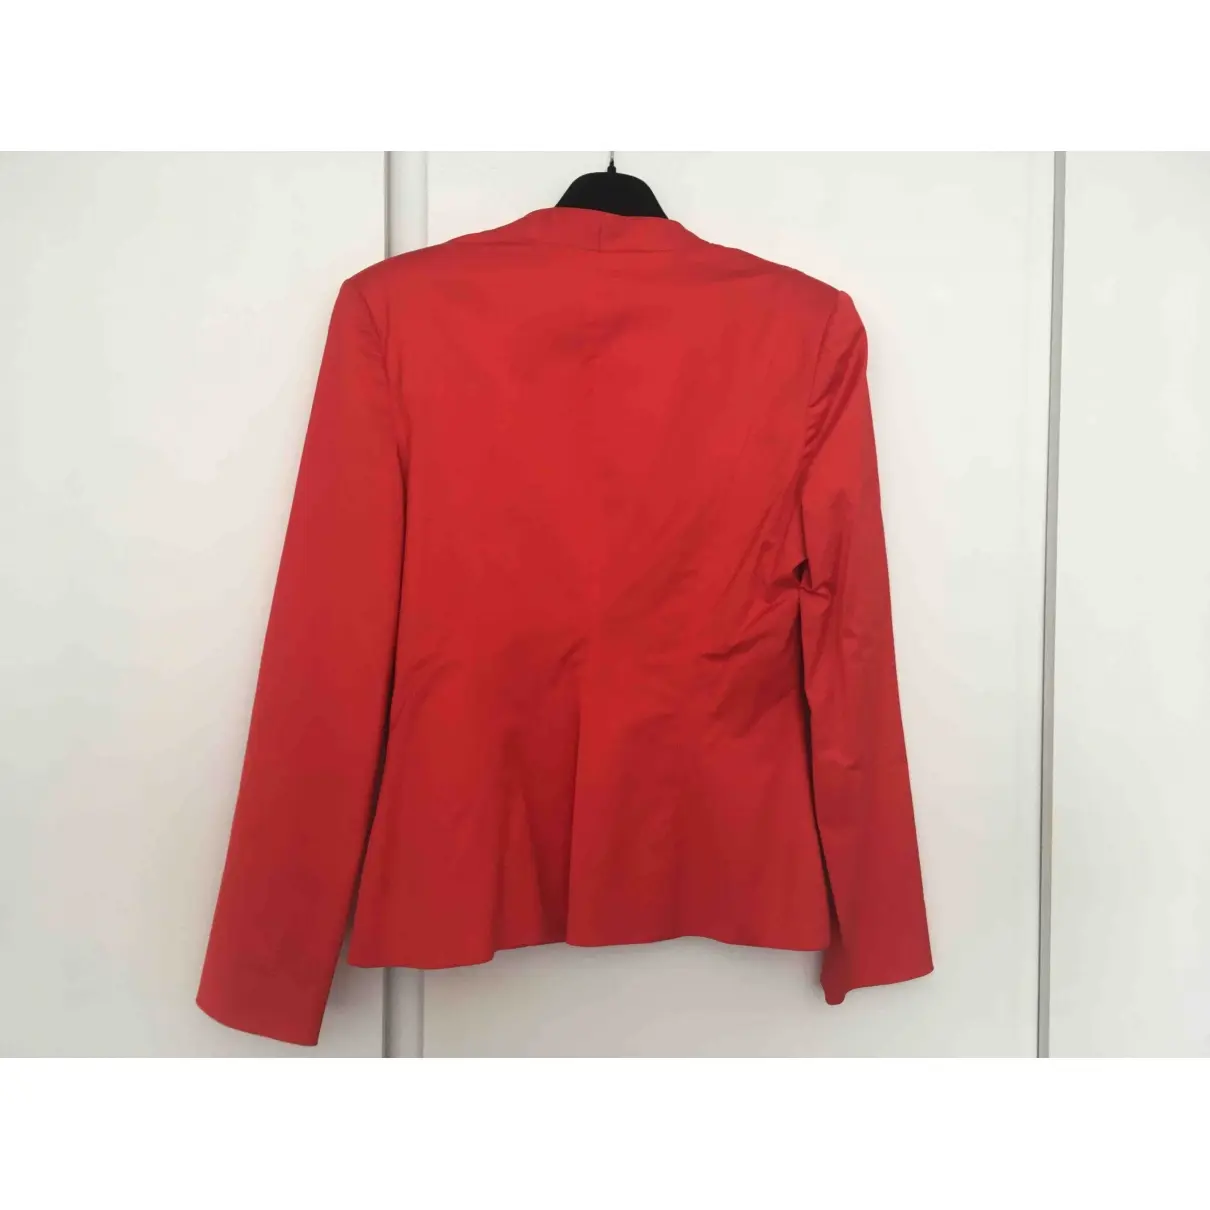 Fatima Lopes Red Cotton Jacket for sale